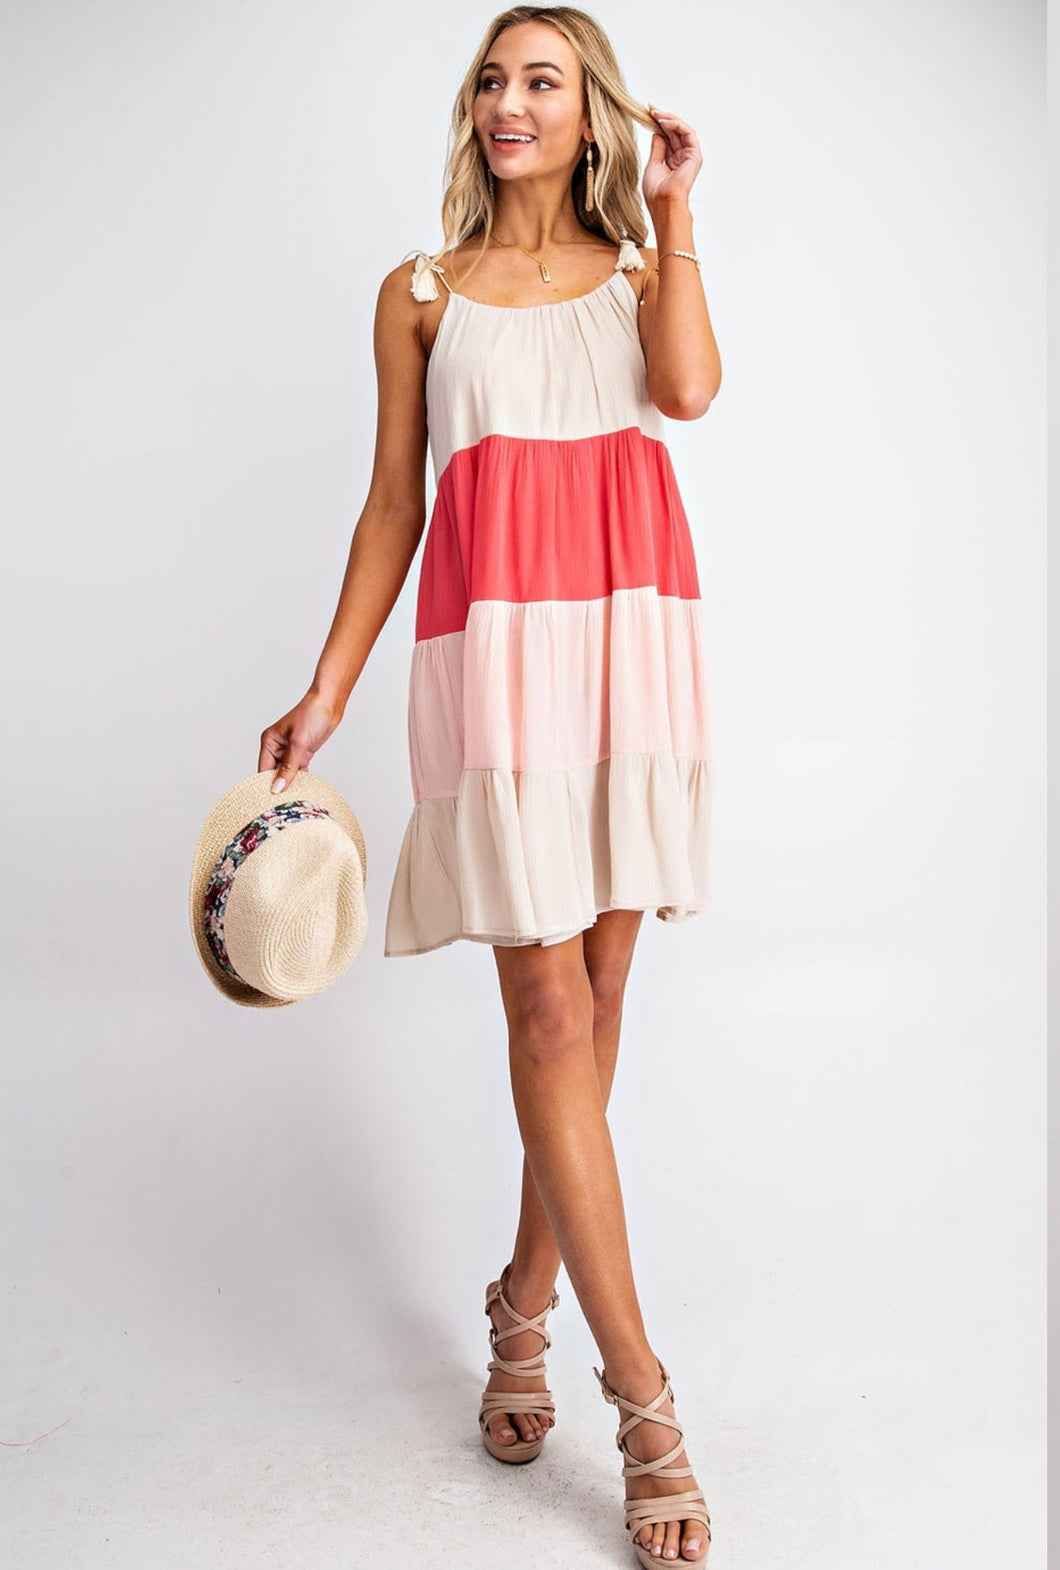 Stop and Smell the Hibiscus Pink Tiered Dress